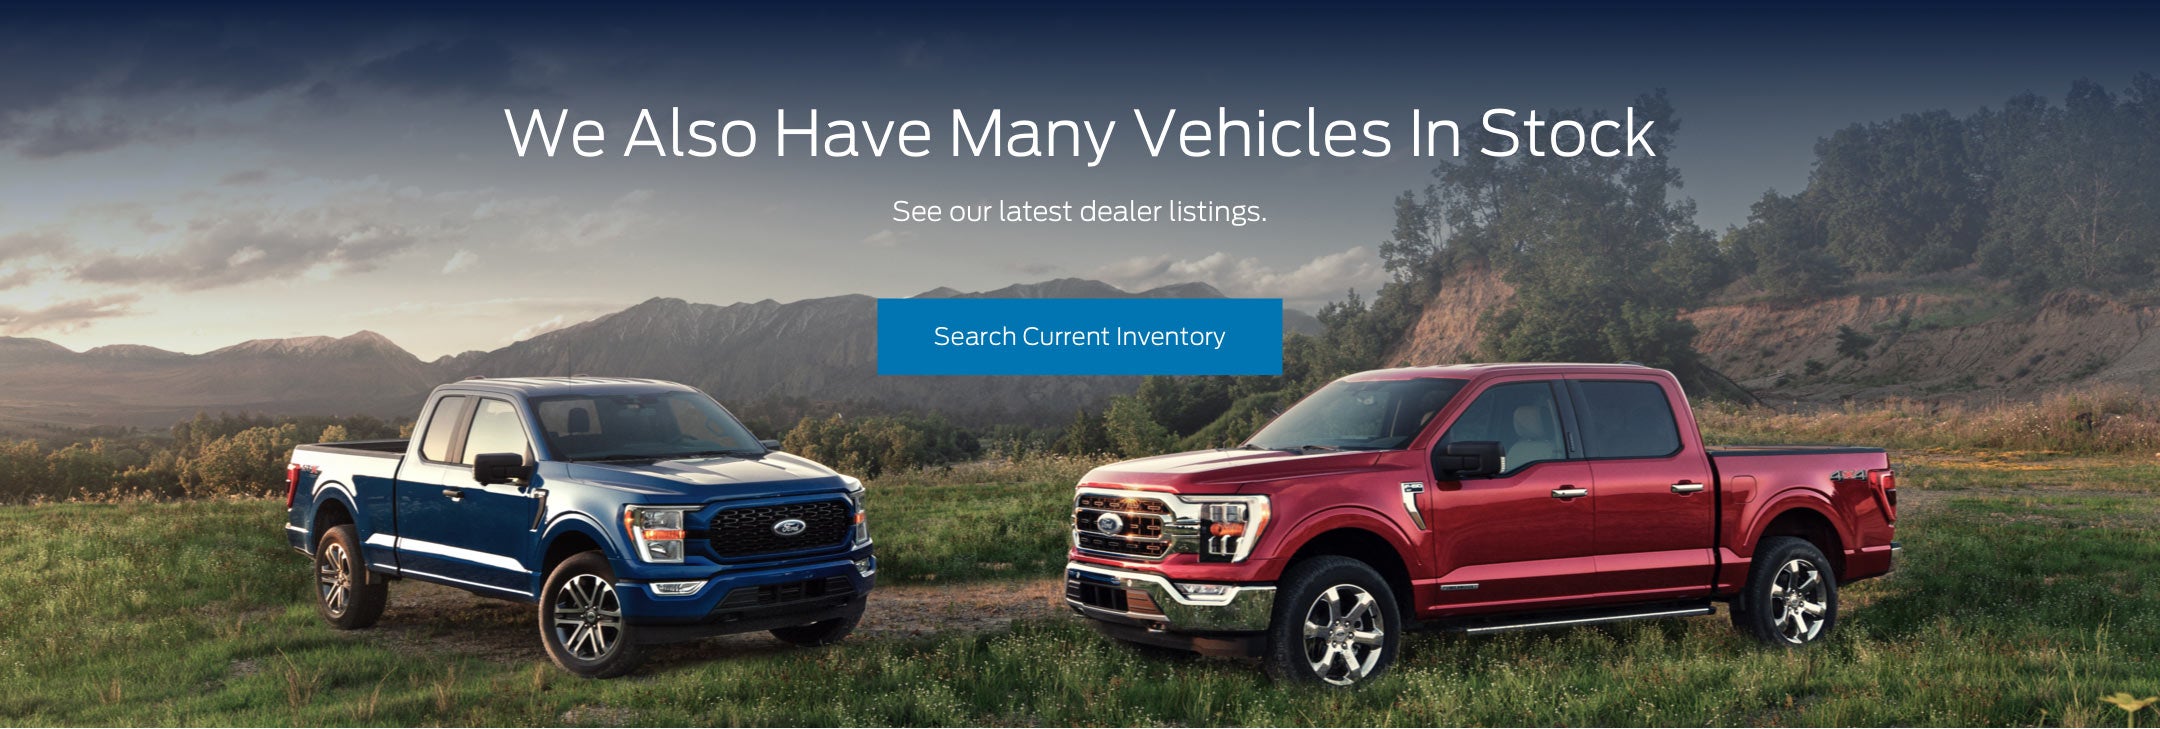 Ford vehicles in stock | Billy Howell Ford in Cumming GA